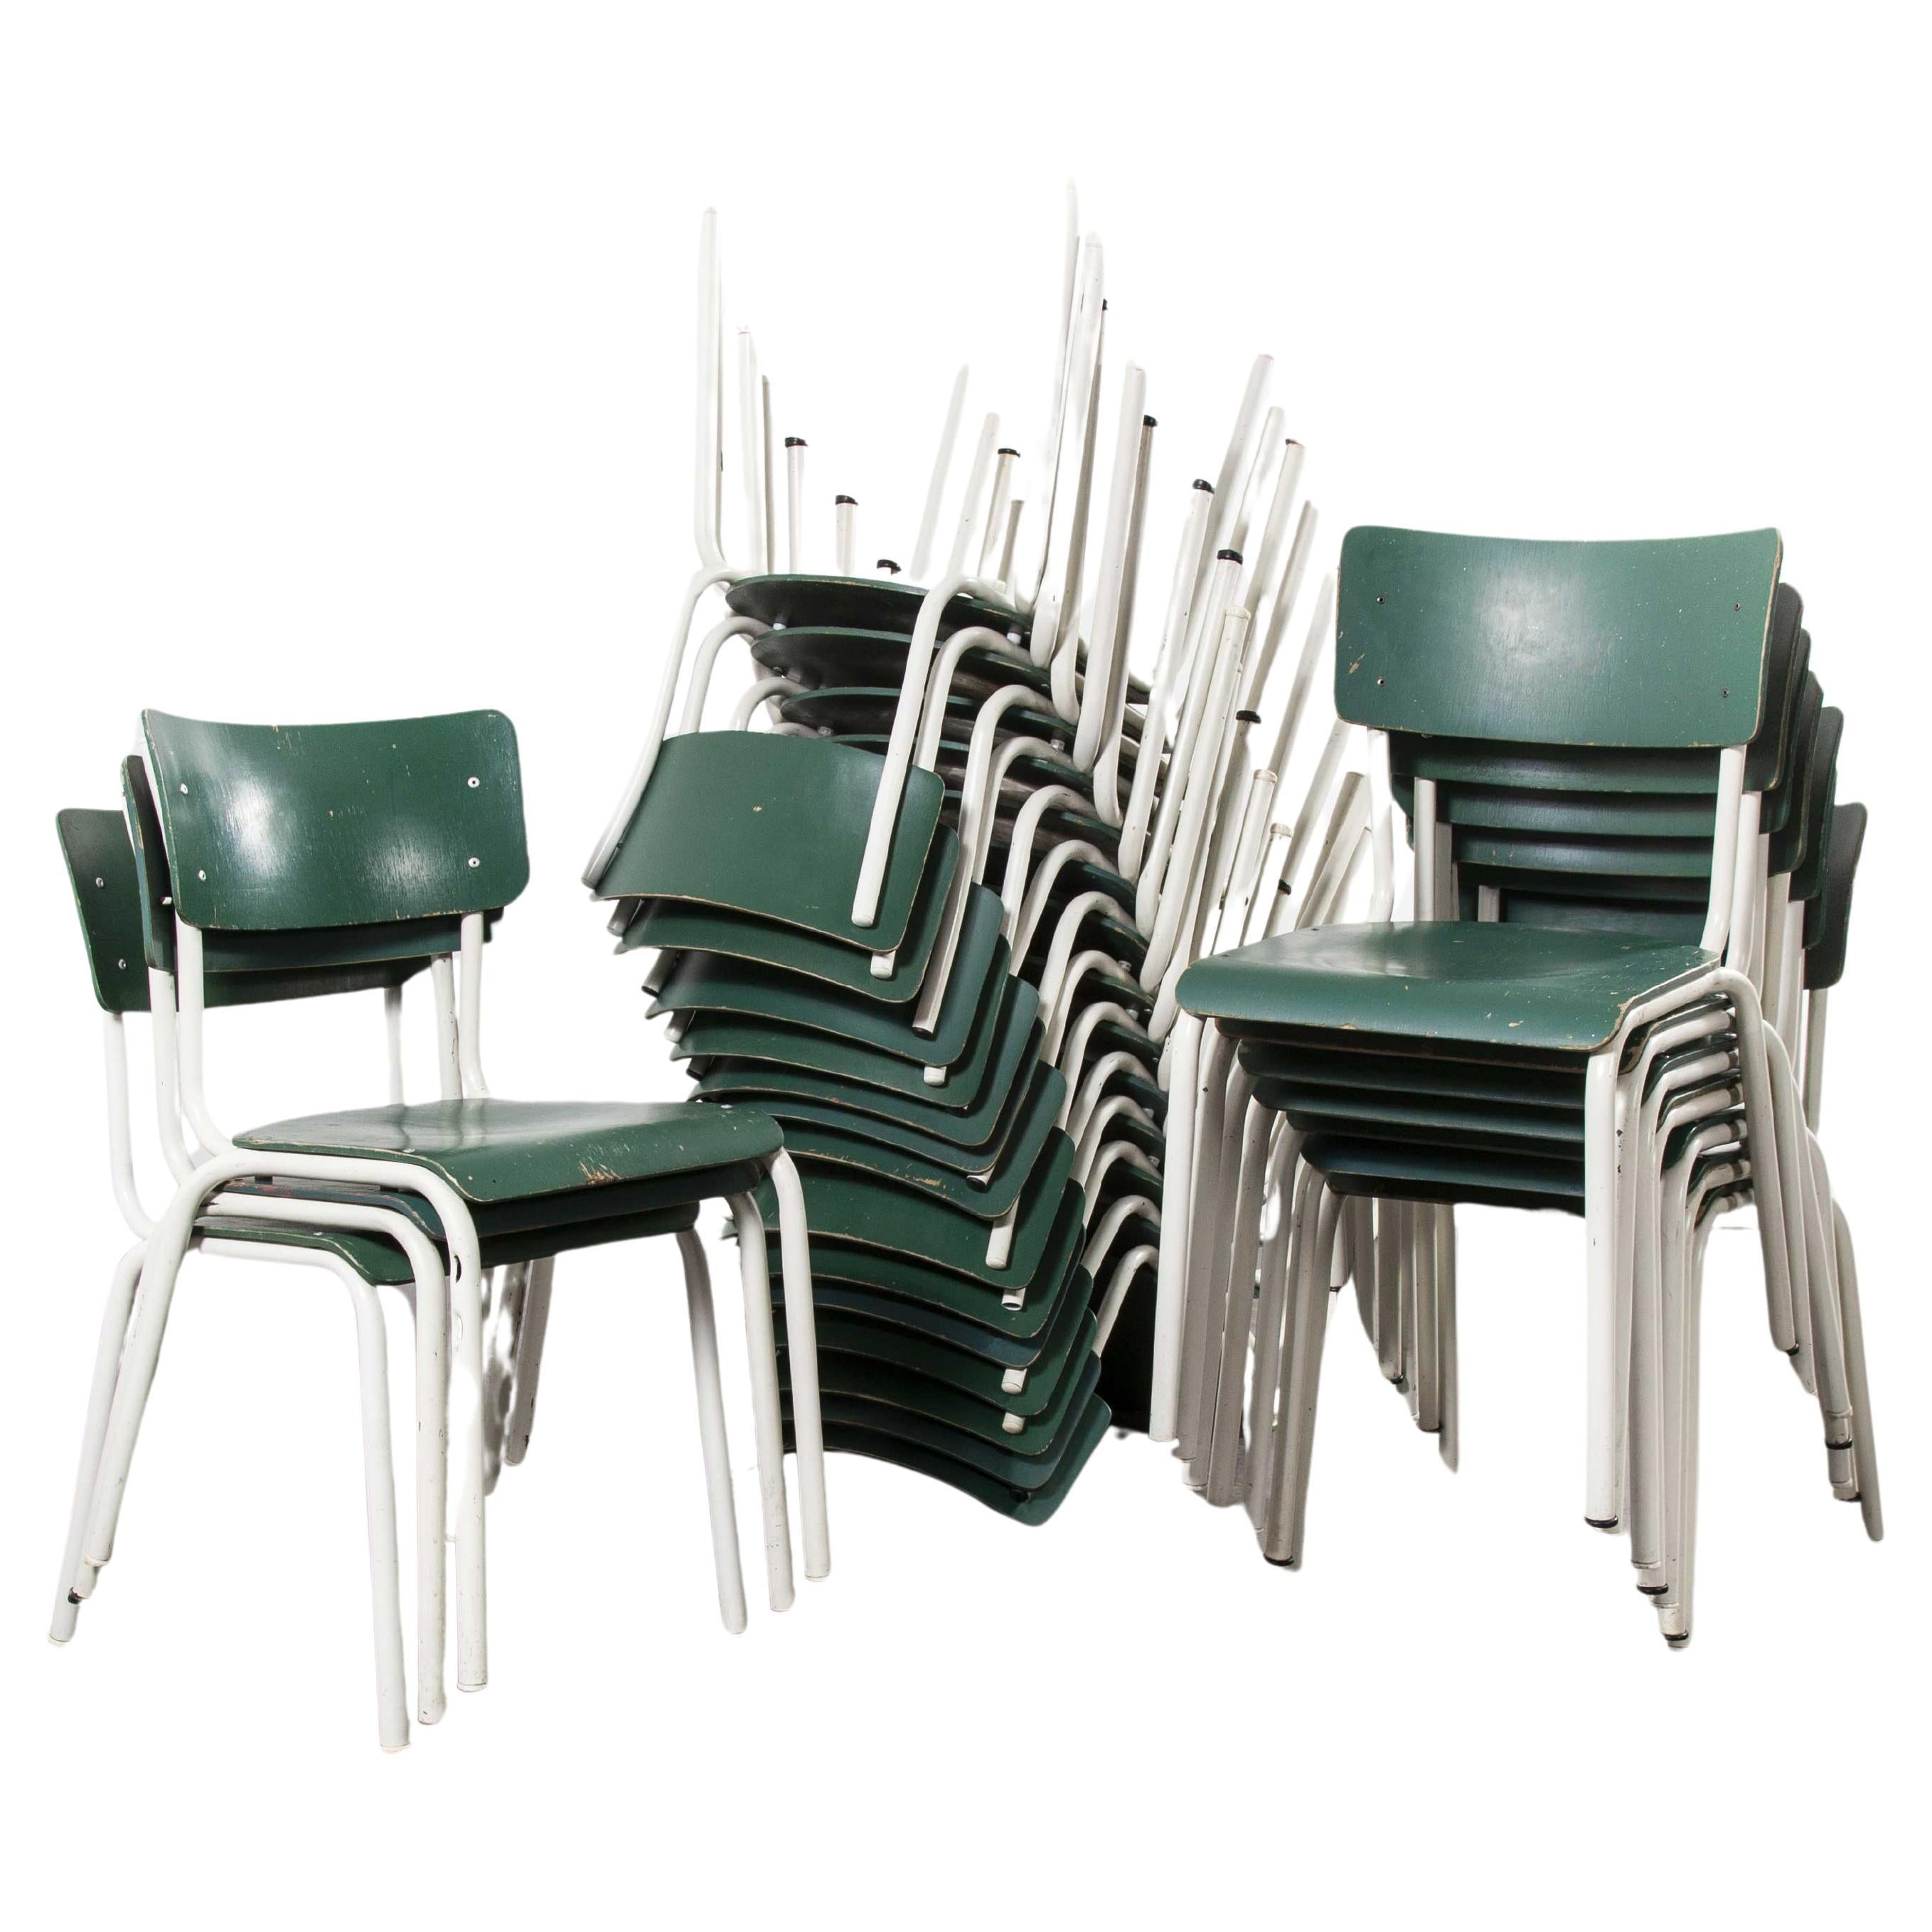 1970's Thonet Stacking Dining Chairs For The German Army - Green - Good Qty For Sale